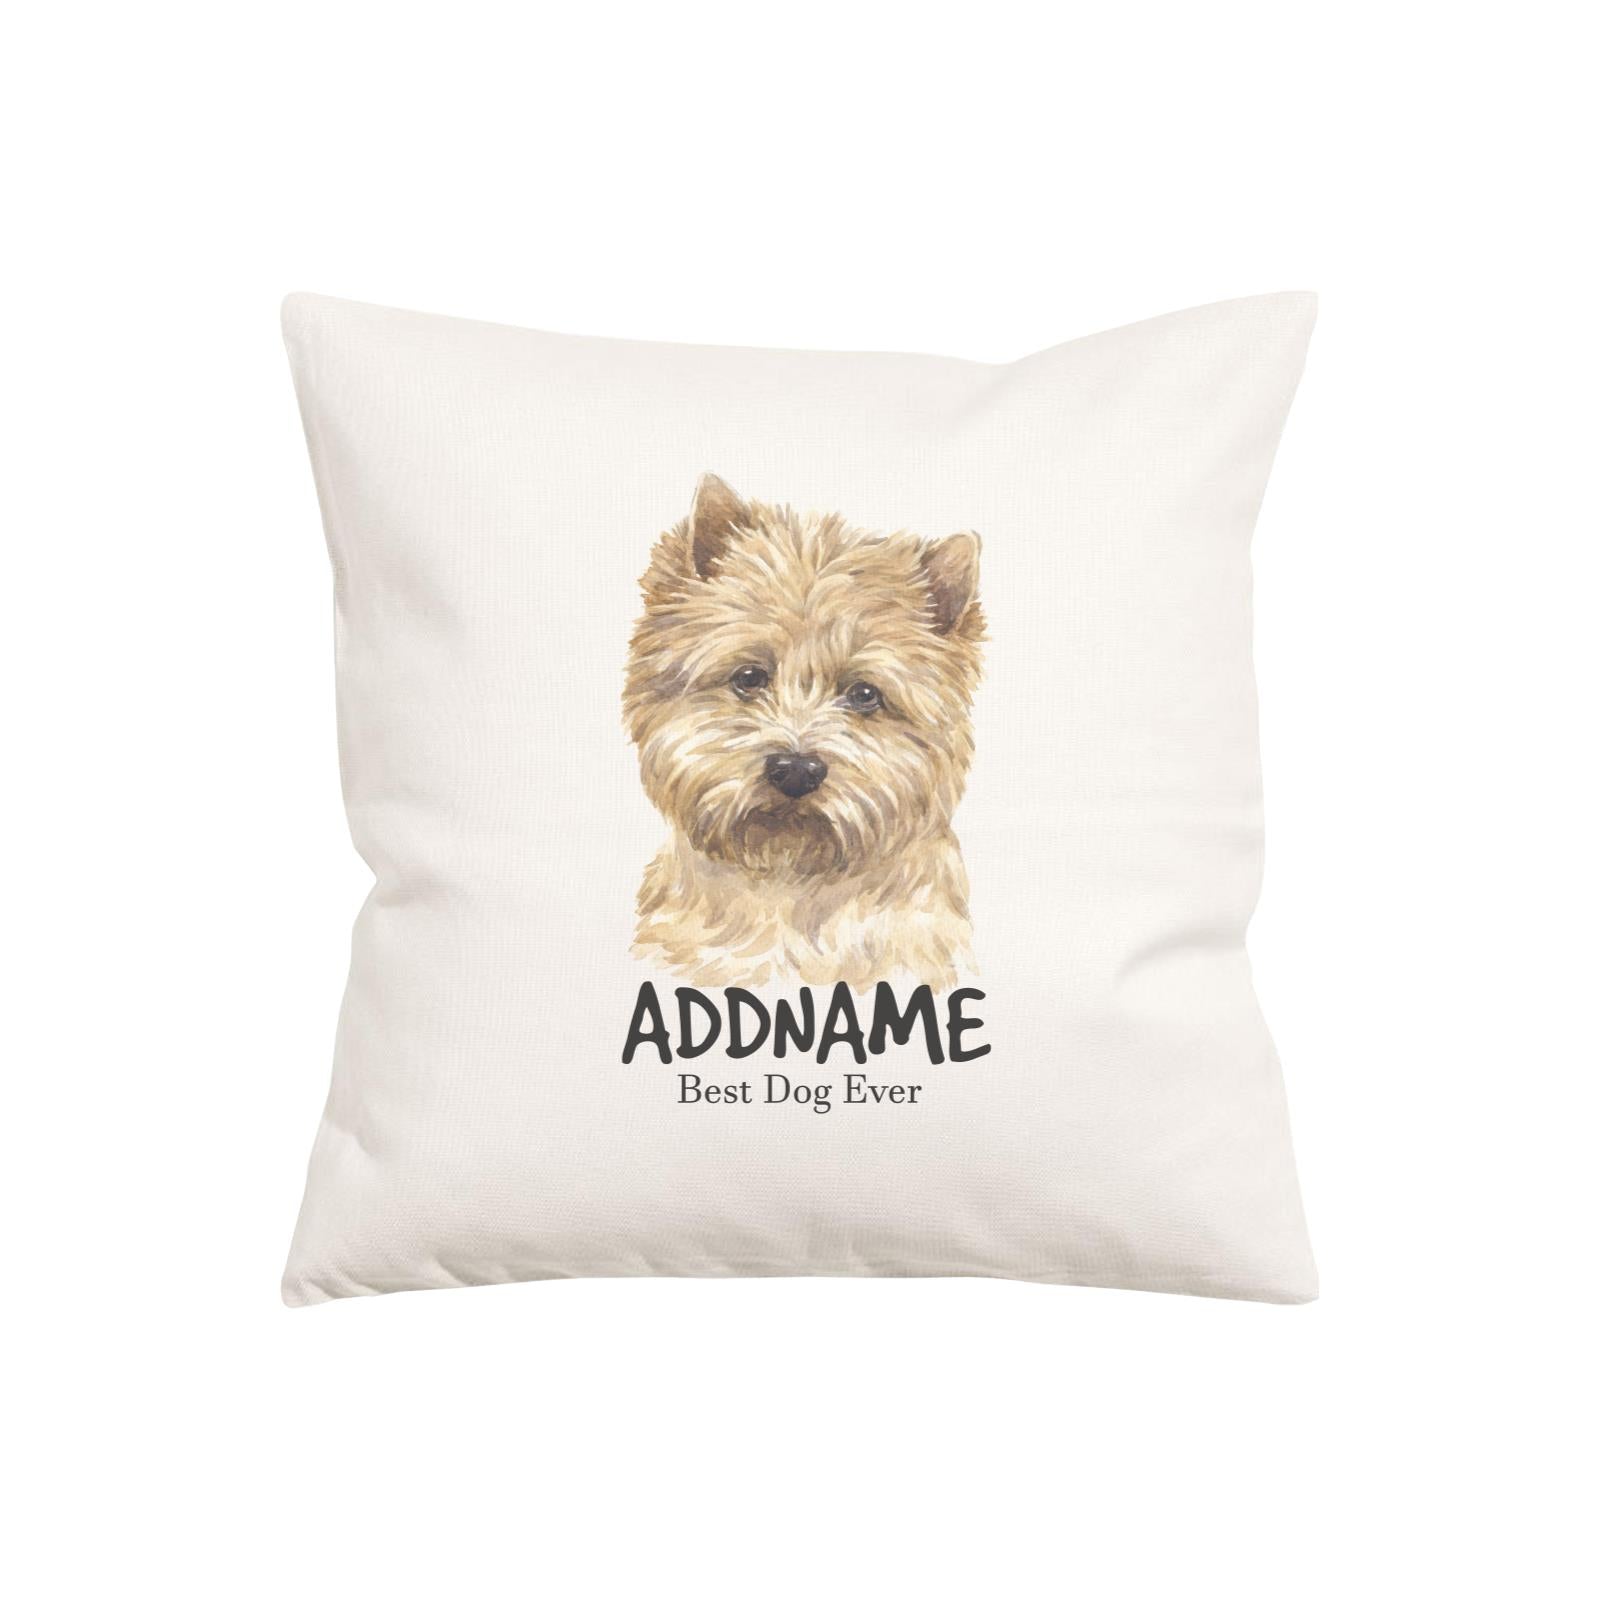 Watercolor Dog Cairn Terrier Best Dog Ever Addname Pillow Cushion